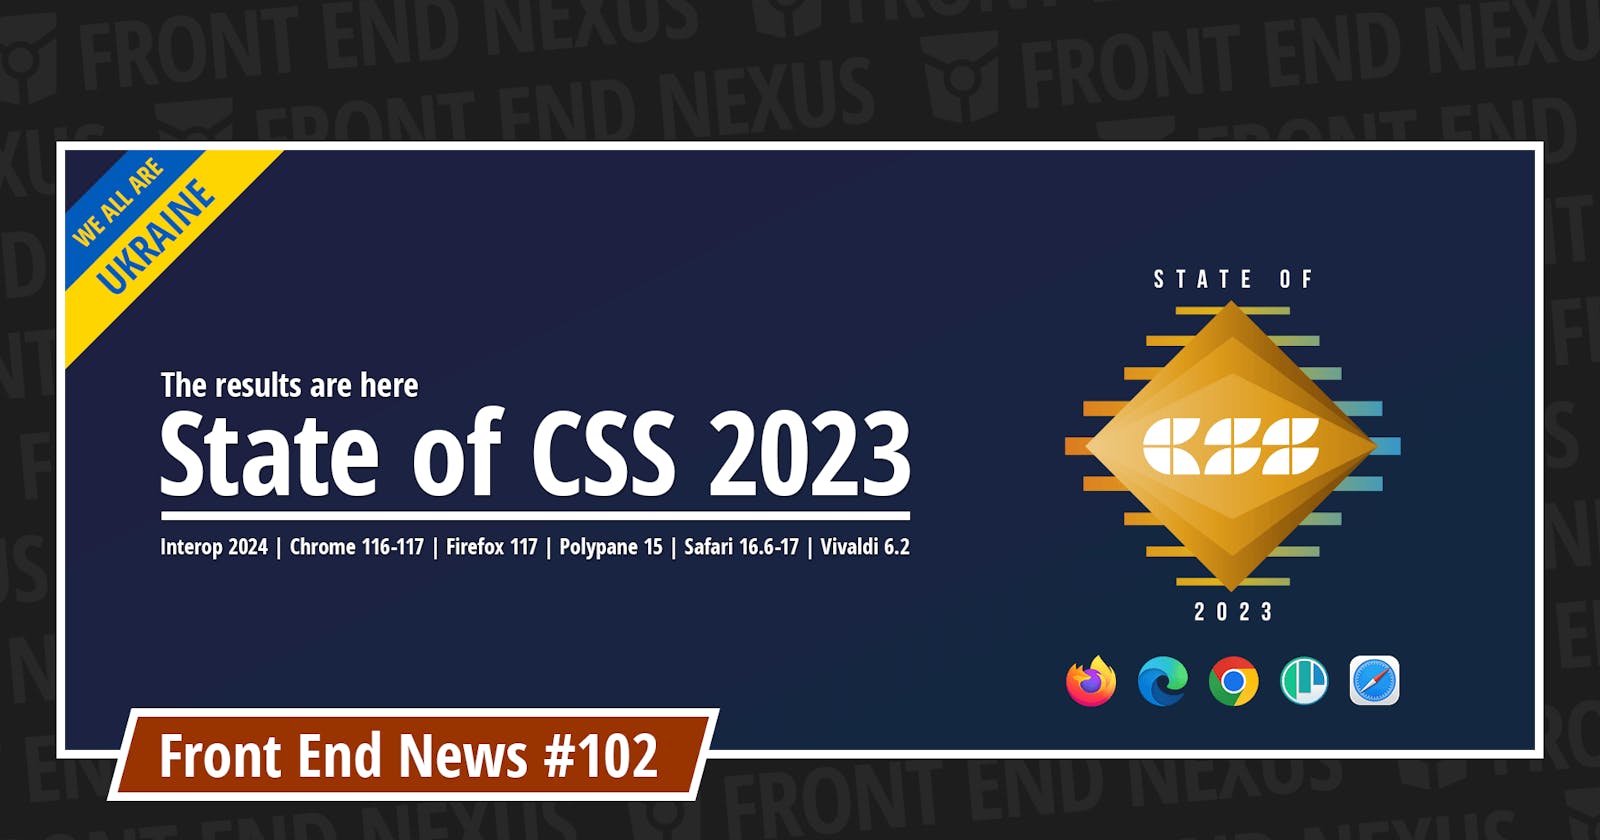 State of CSS 2023 Results, Interop 2024, Chrome 116-117, Firefox 117, Polypane 15, Safari 16.6-17, Vivaldi 6.2, and more | Front End News #102